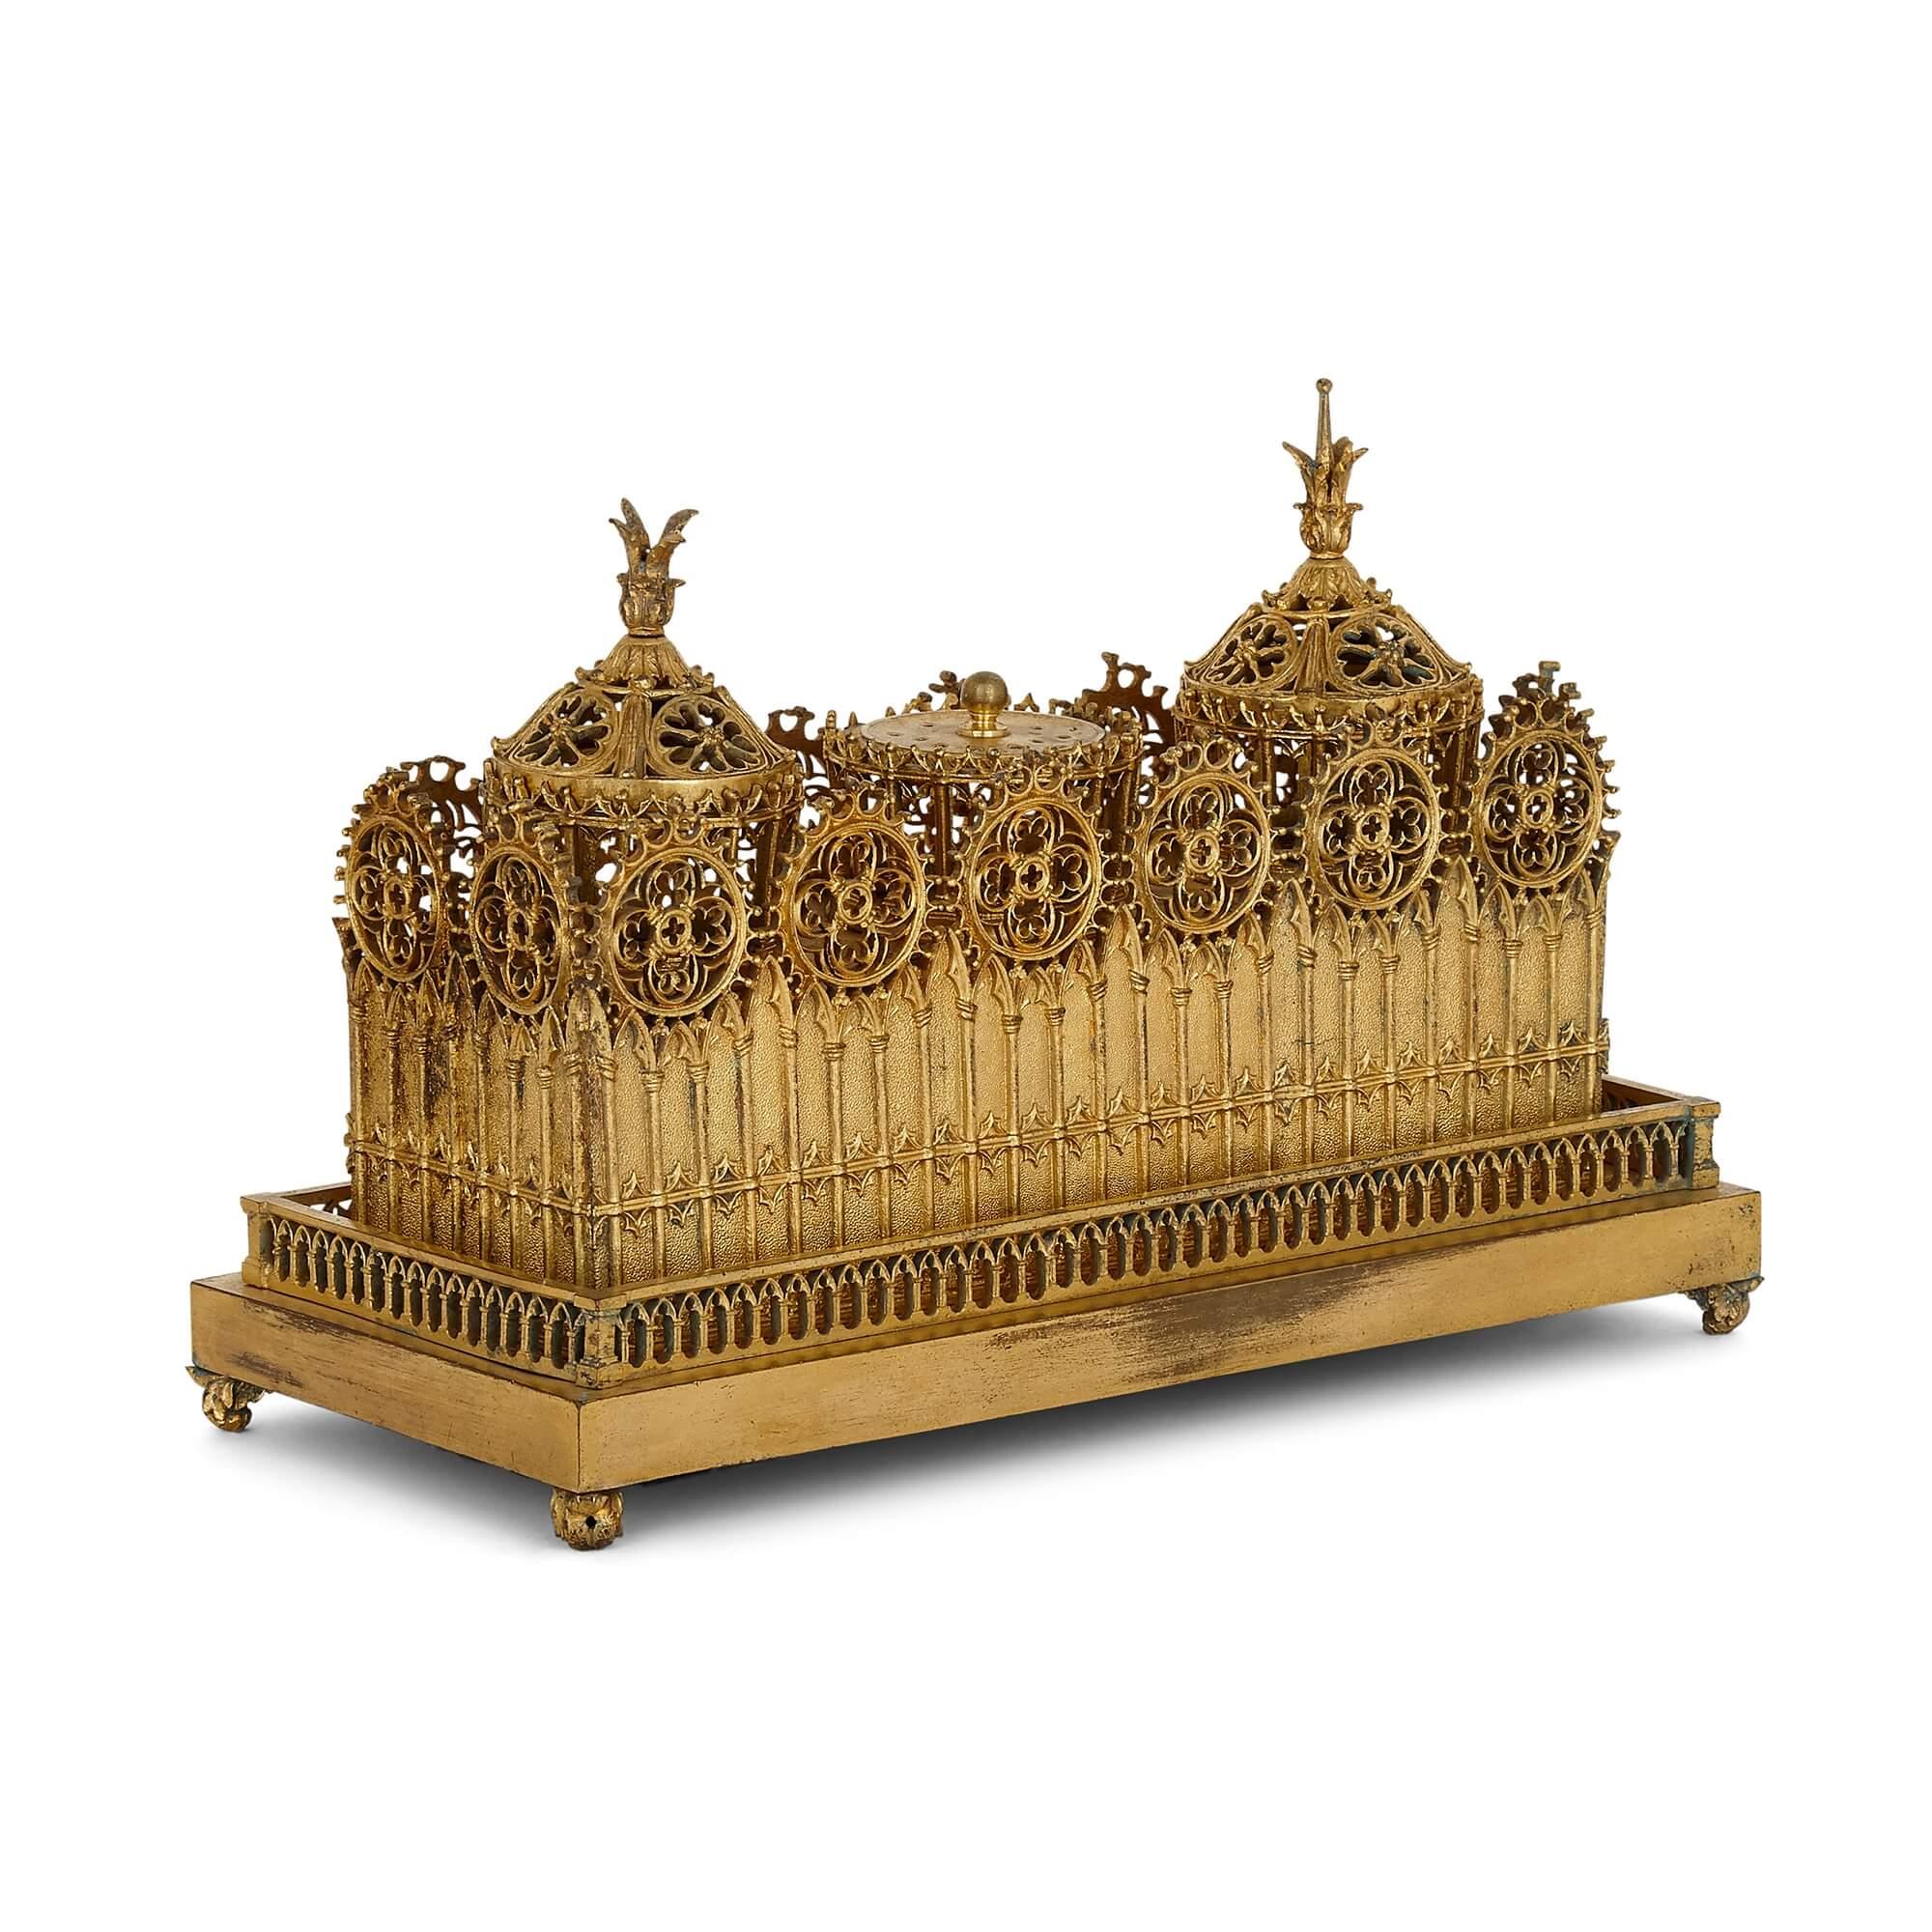 Victorian gilt inkstand desk set in the Gothic style
English, 19th Century
Height 19cm, width 27cm, depth 12.5cm

This wonderful inkstand is a fine piece of Victorian period design. The stand in designed in the Victorian Gothic style, with the body